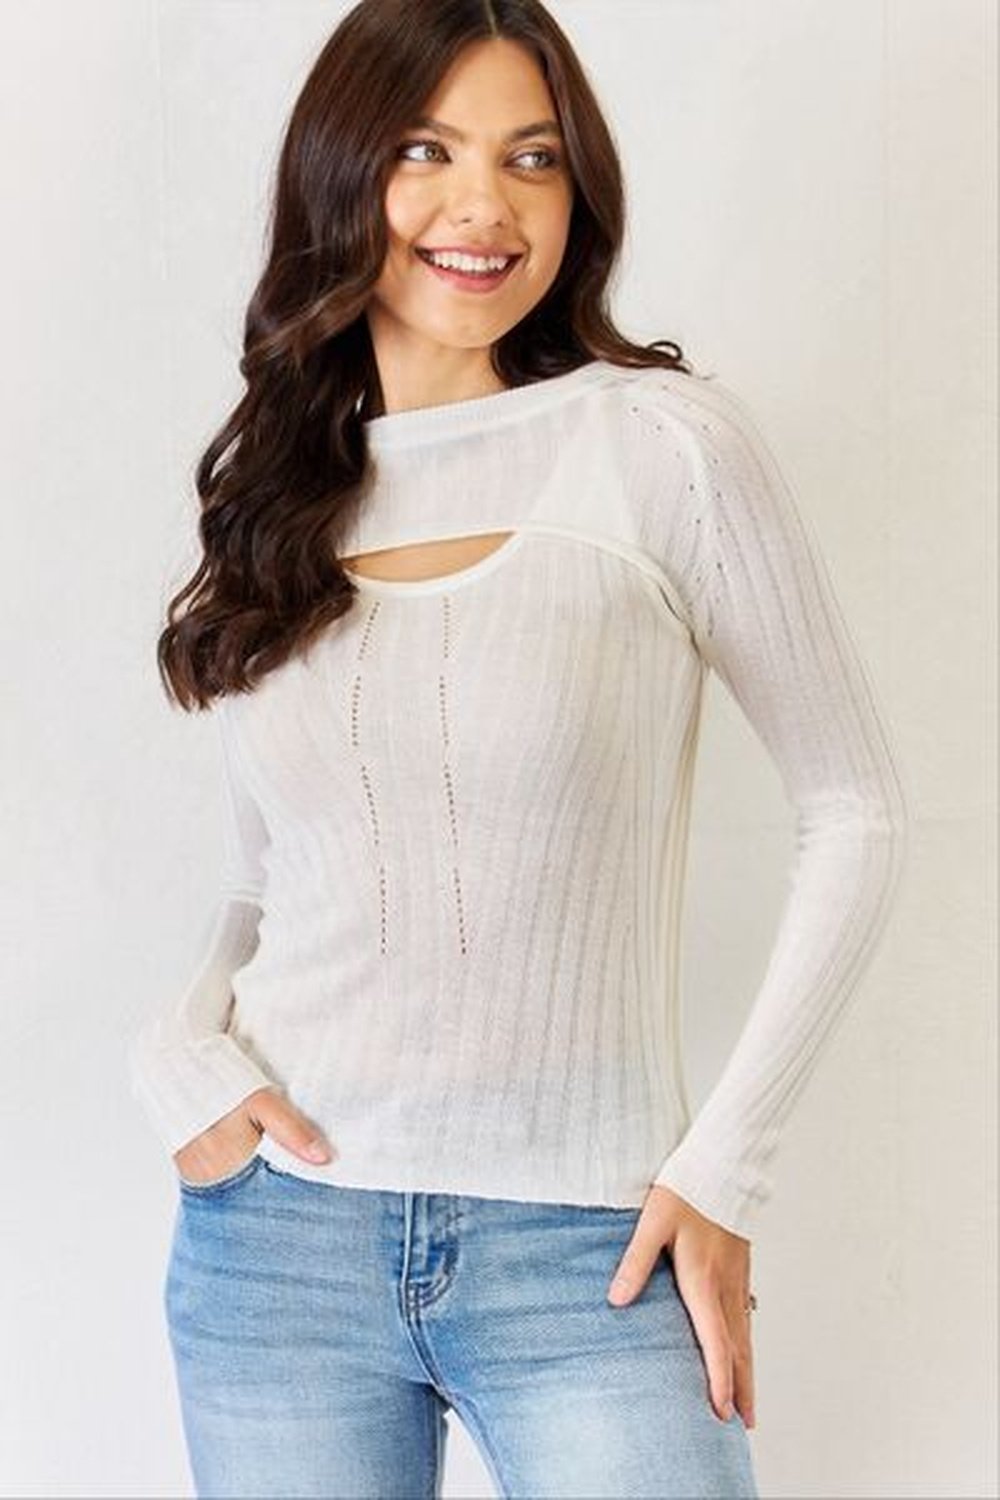 J.NNA Fitted Long Sleeve Cutout Top - Blouses - FITGGINS